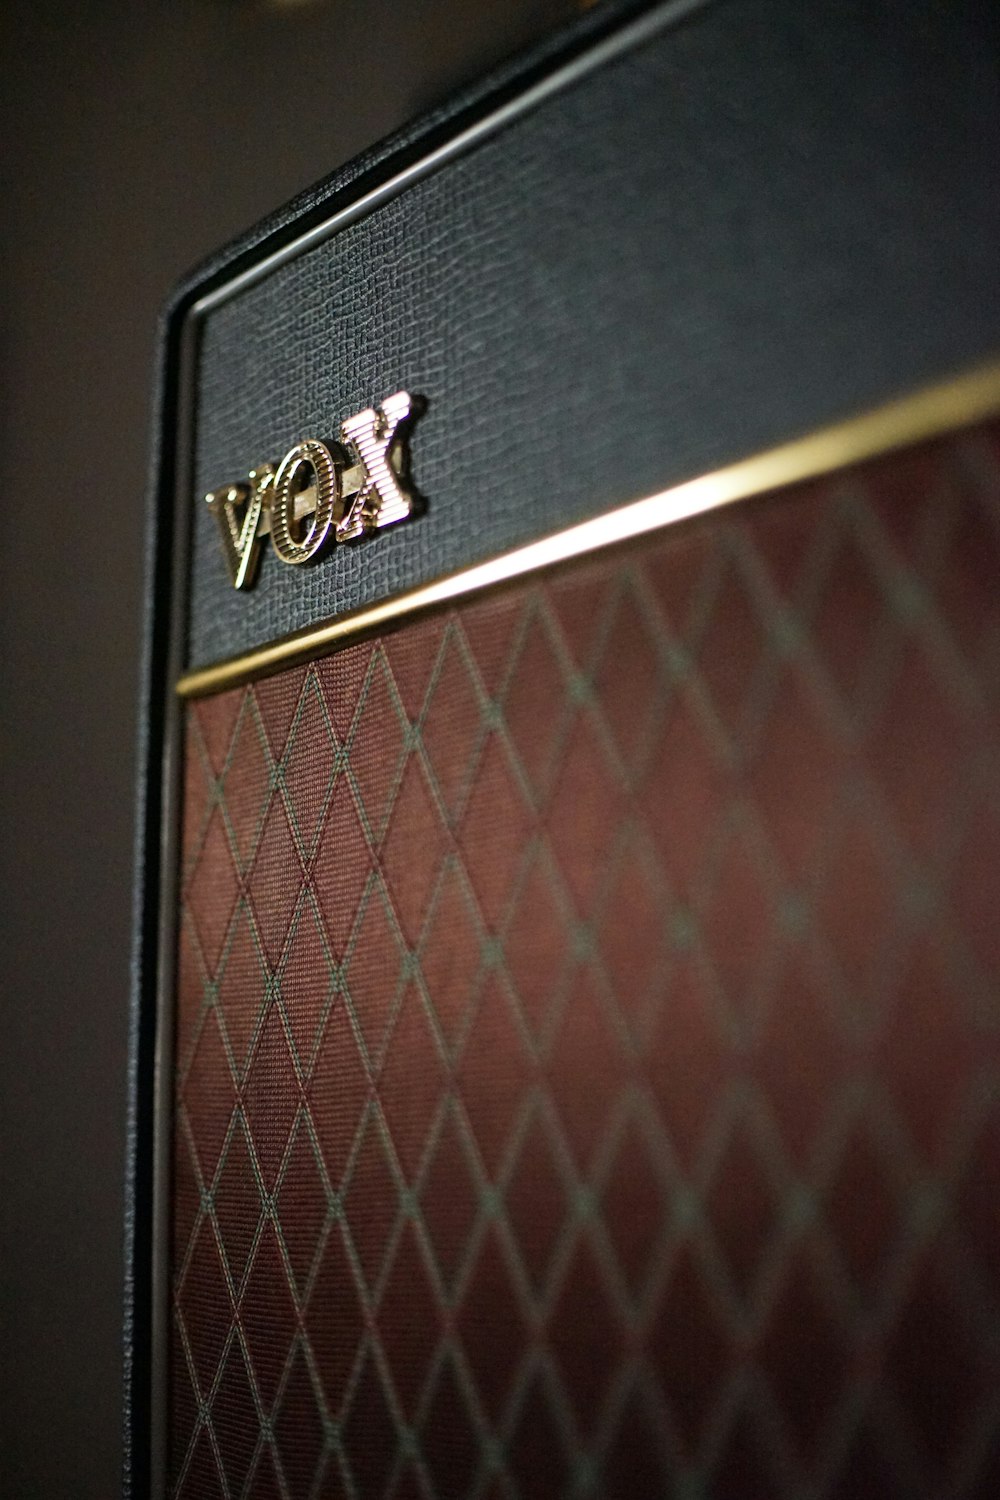 a close up of a speaker with the word vox on it